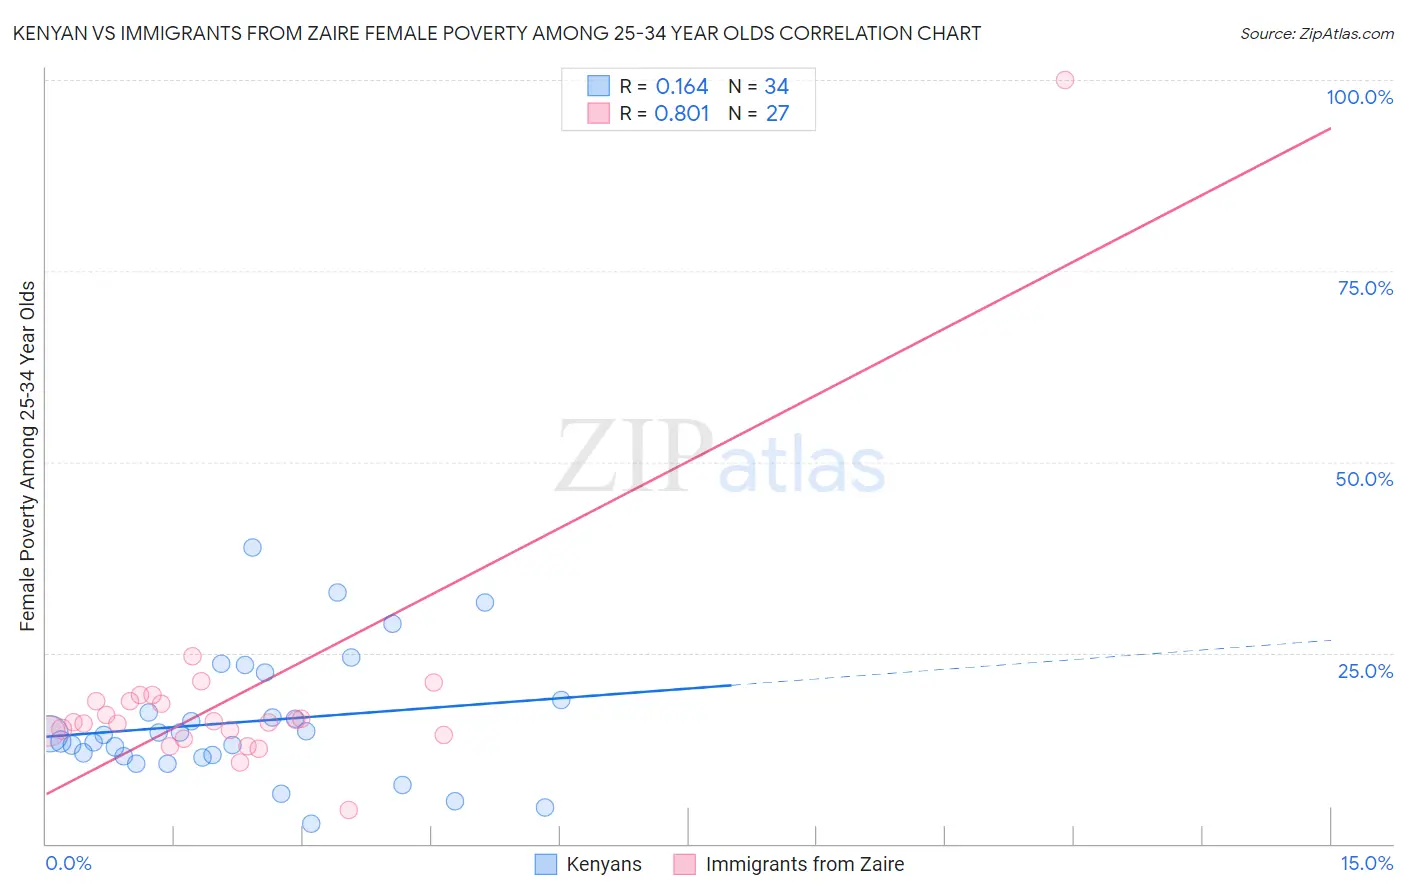 Kenyan vs Immigrants from Zaire Female Poverty Among 25-34 Year Olds